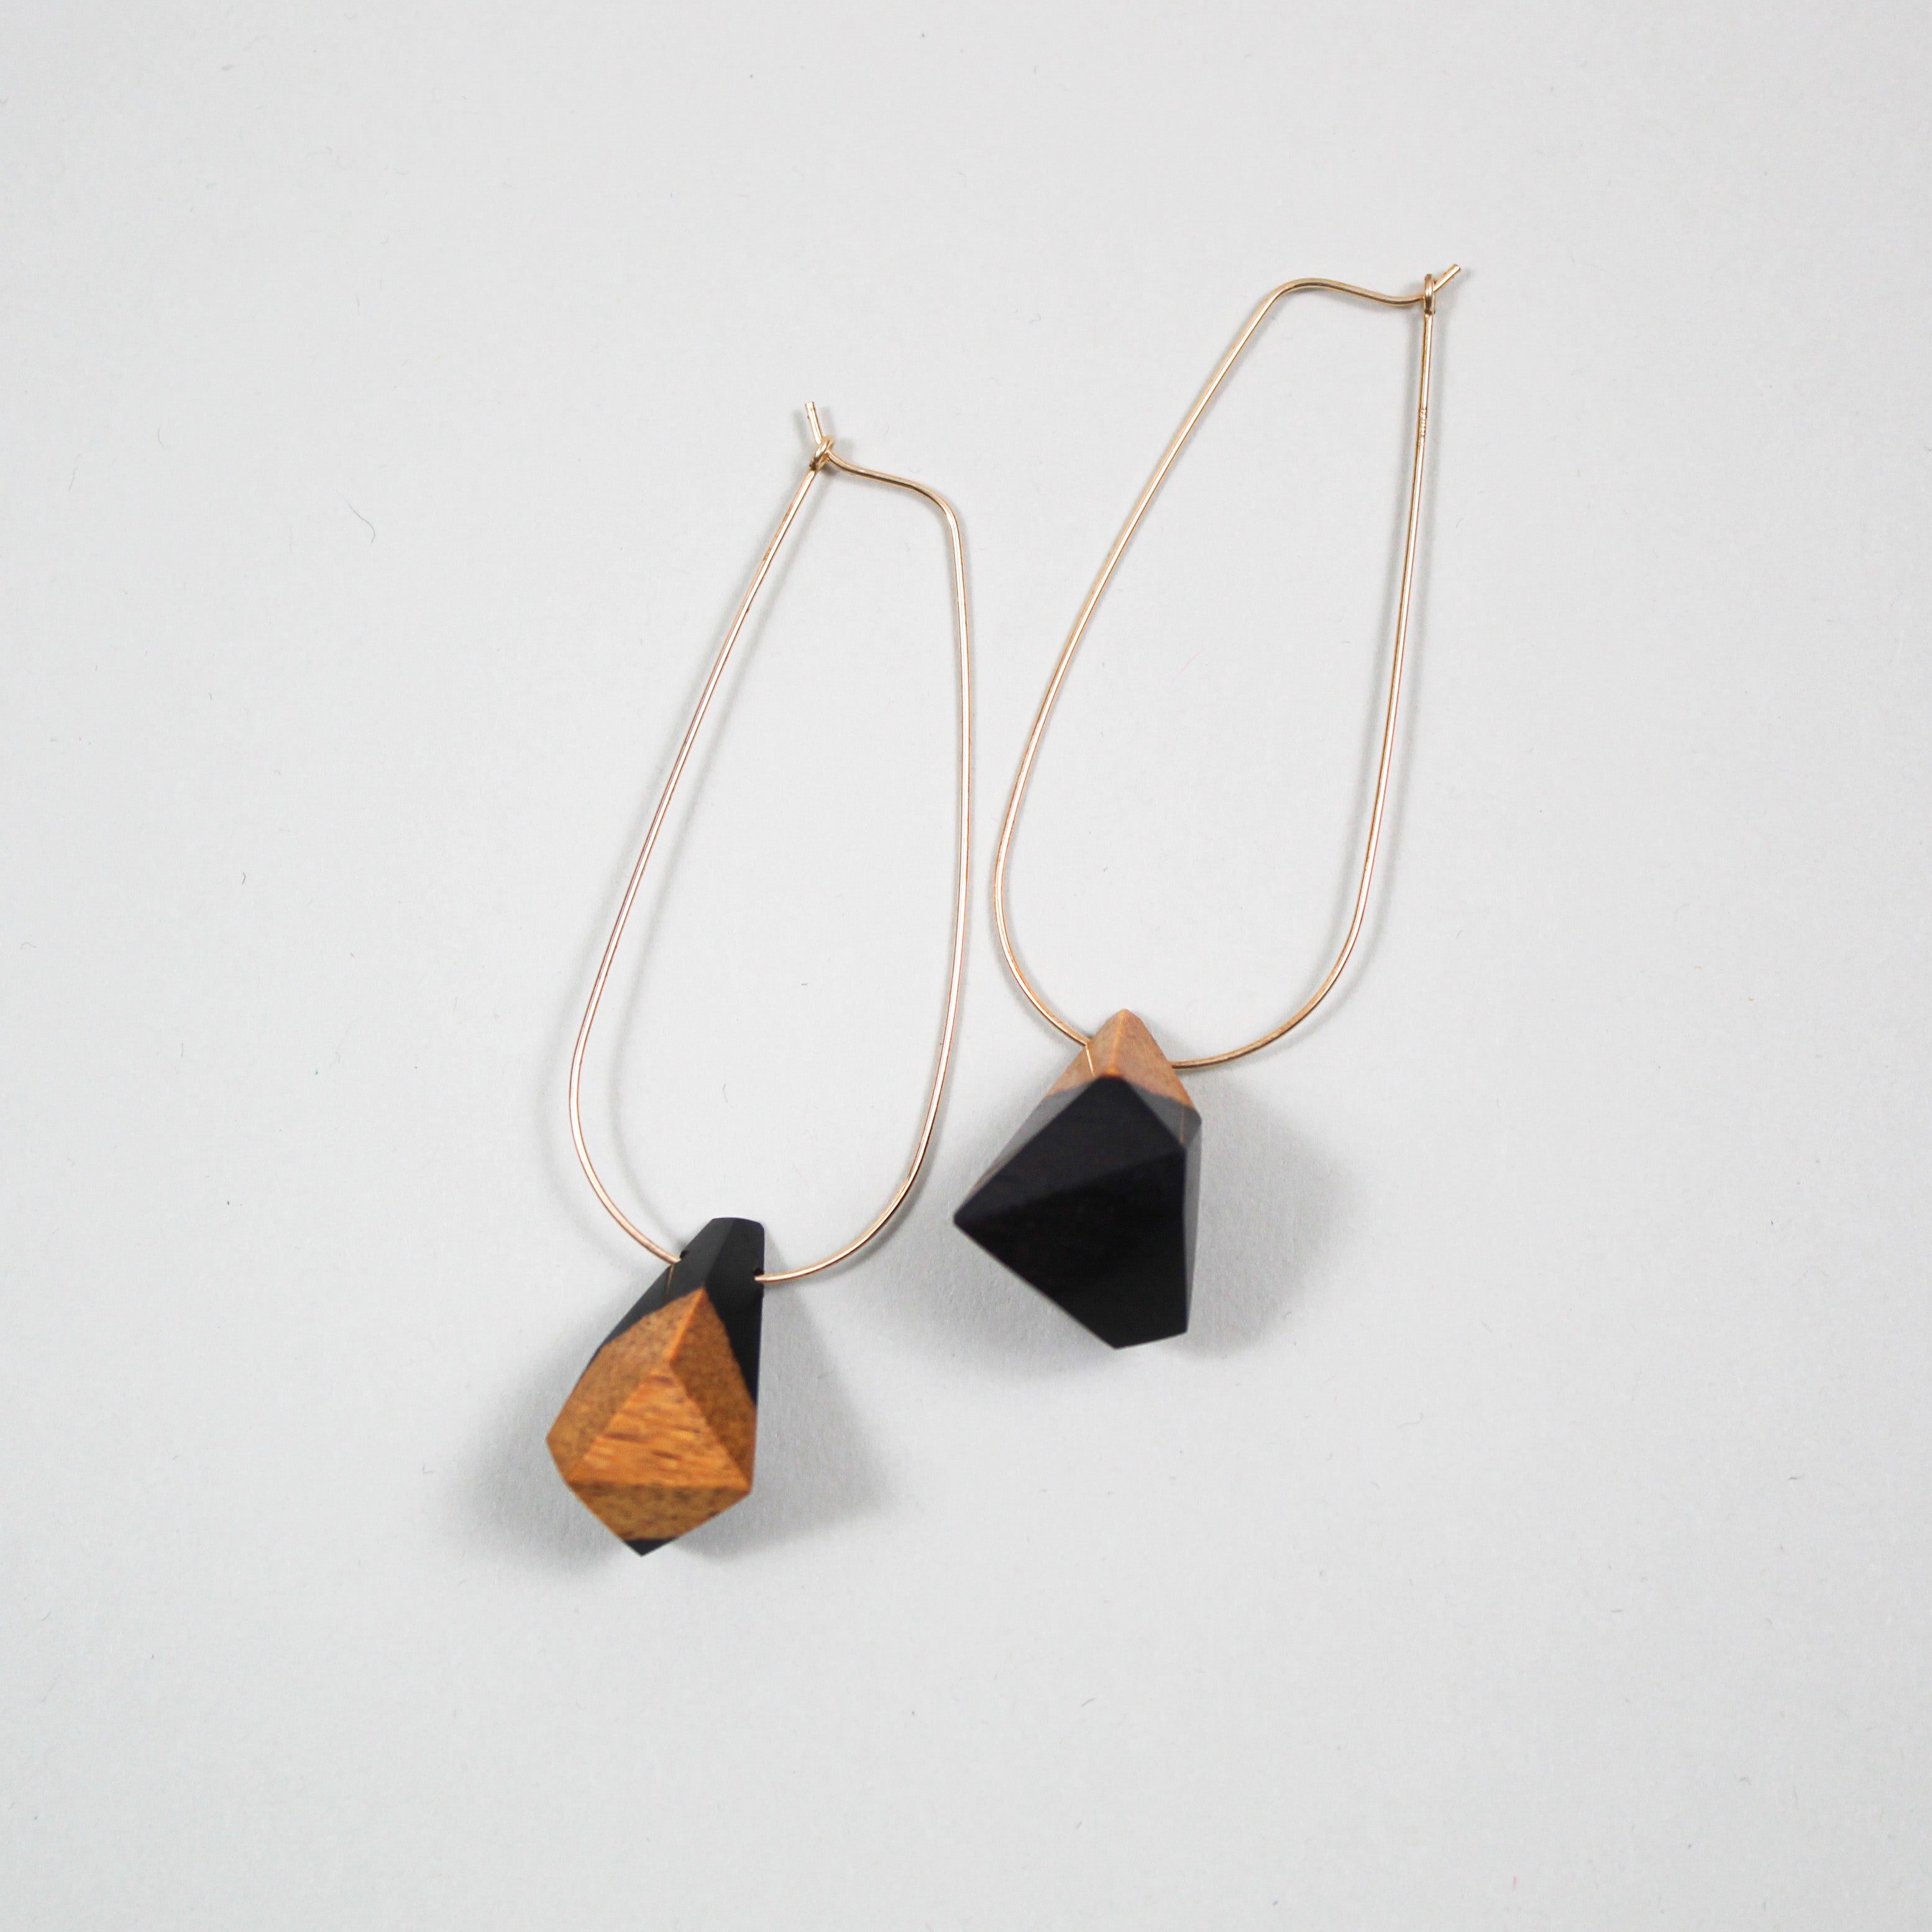 Black and Tan Nugget Earrings with Gold-Plated Teardrop Wires